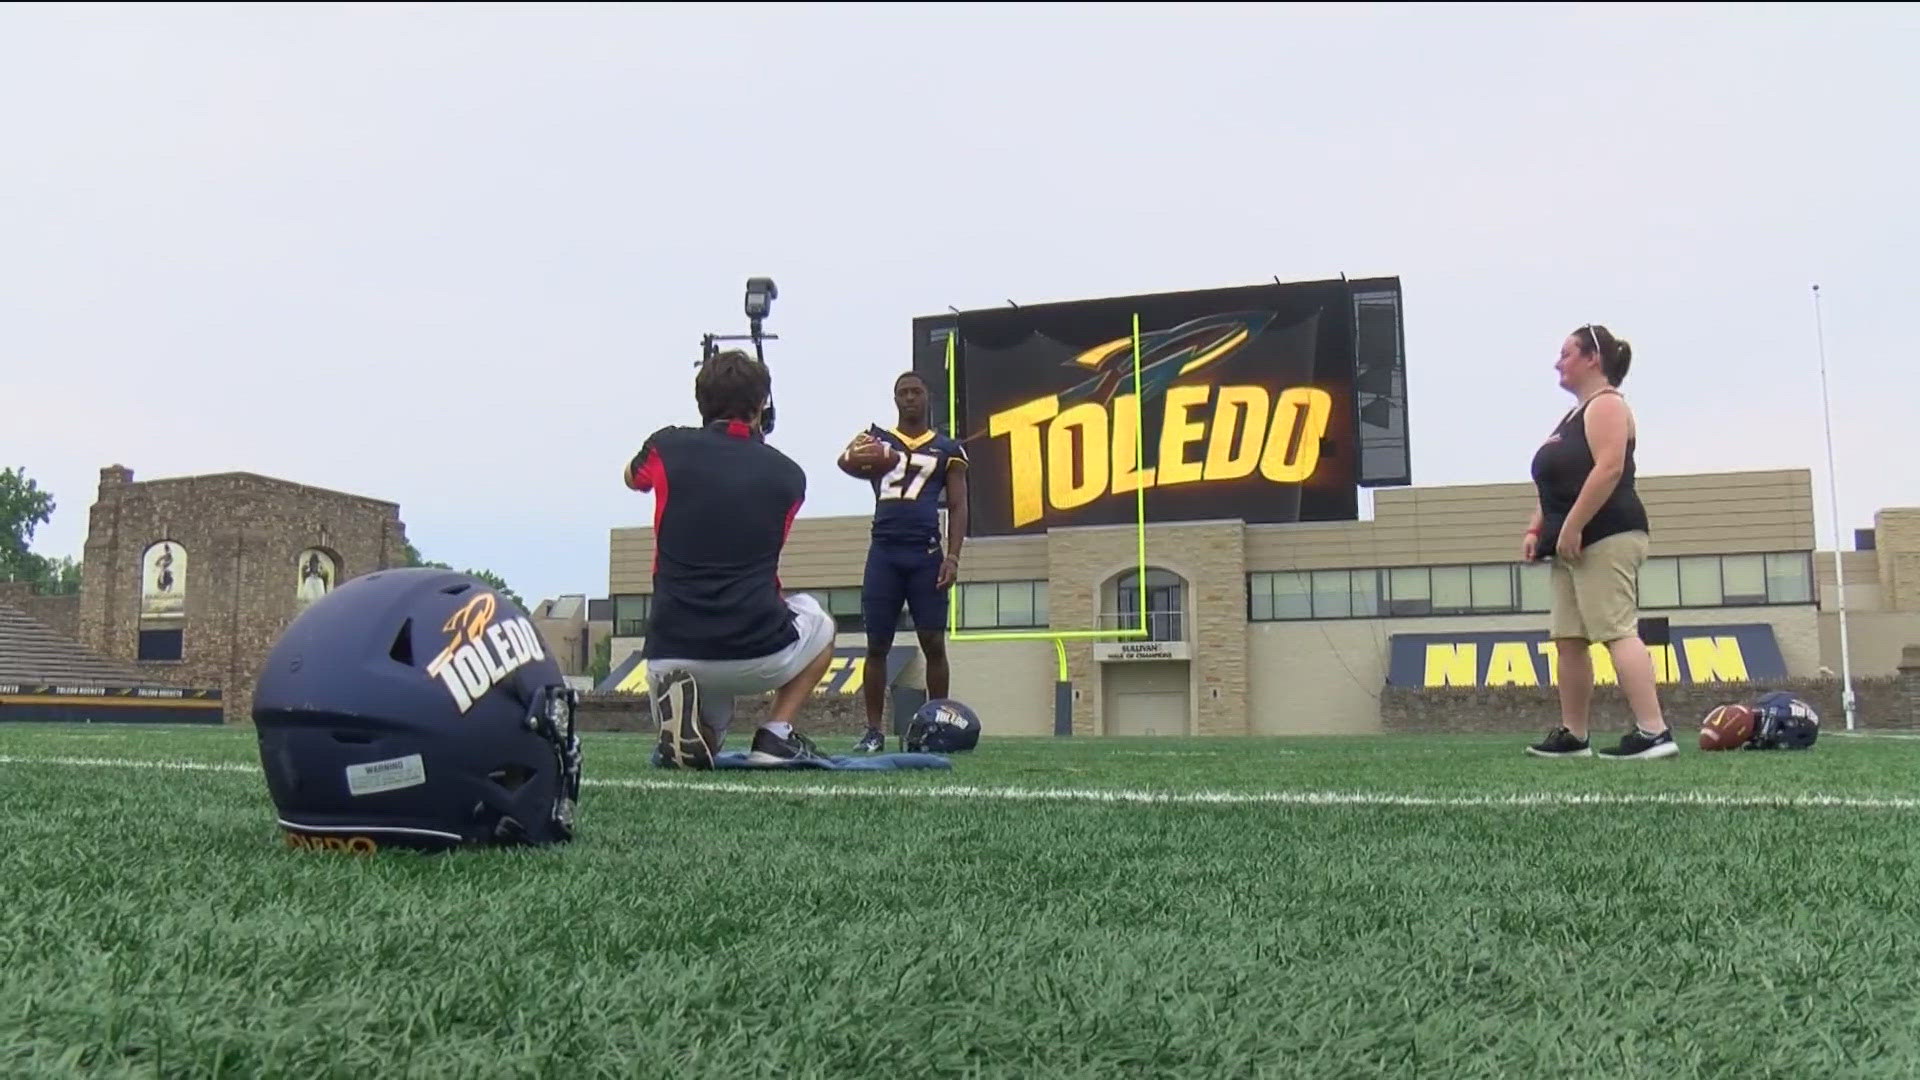 Former Toledo Rocket Quinyon Mitchell was selected by the Eagles in the NFL Draft. Back home, his teammates and school celebrated the occasion.